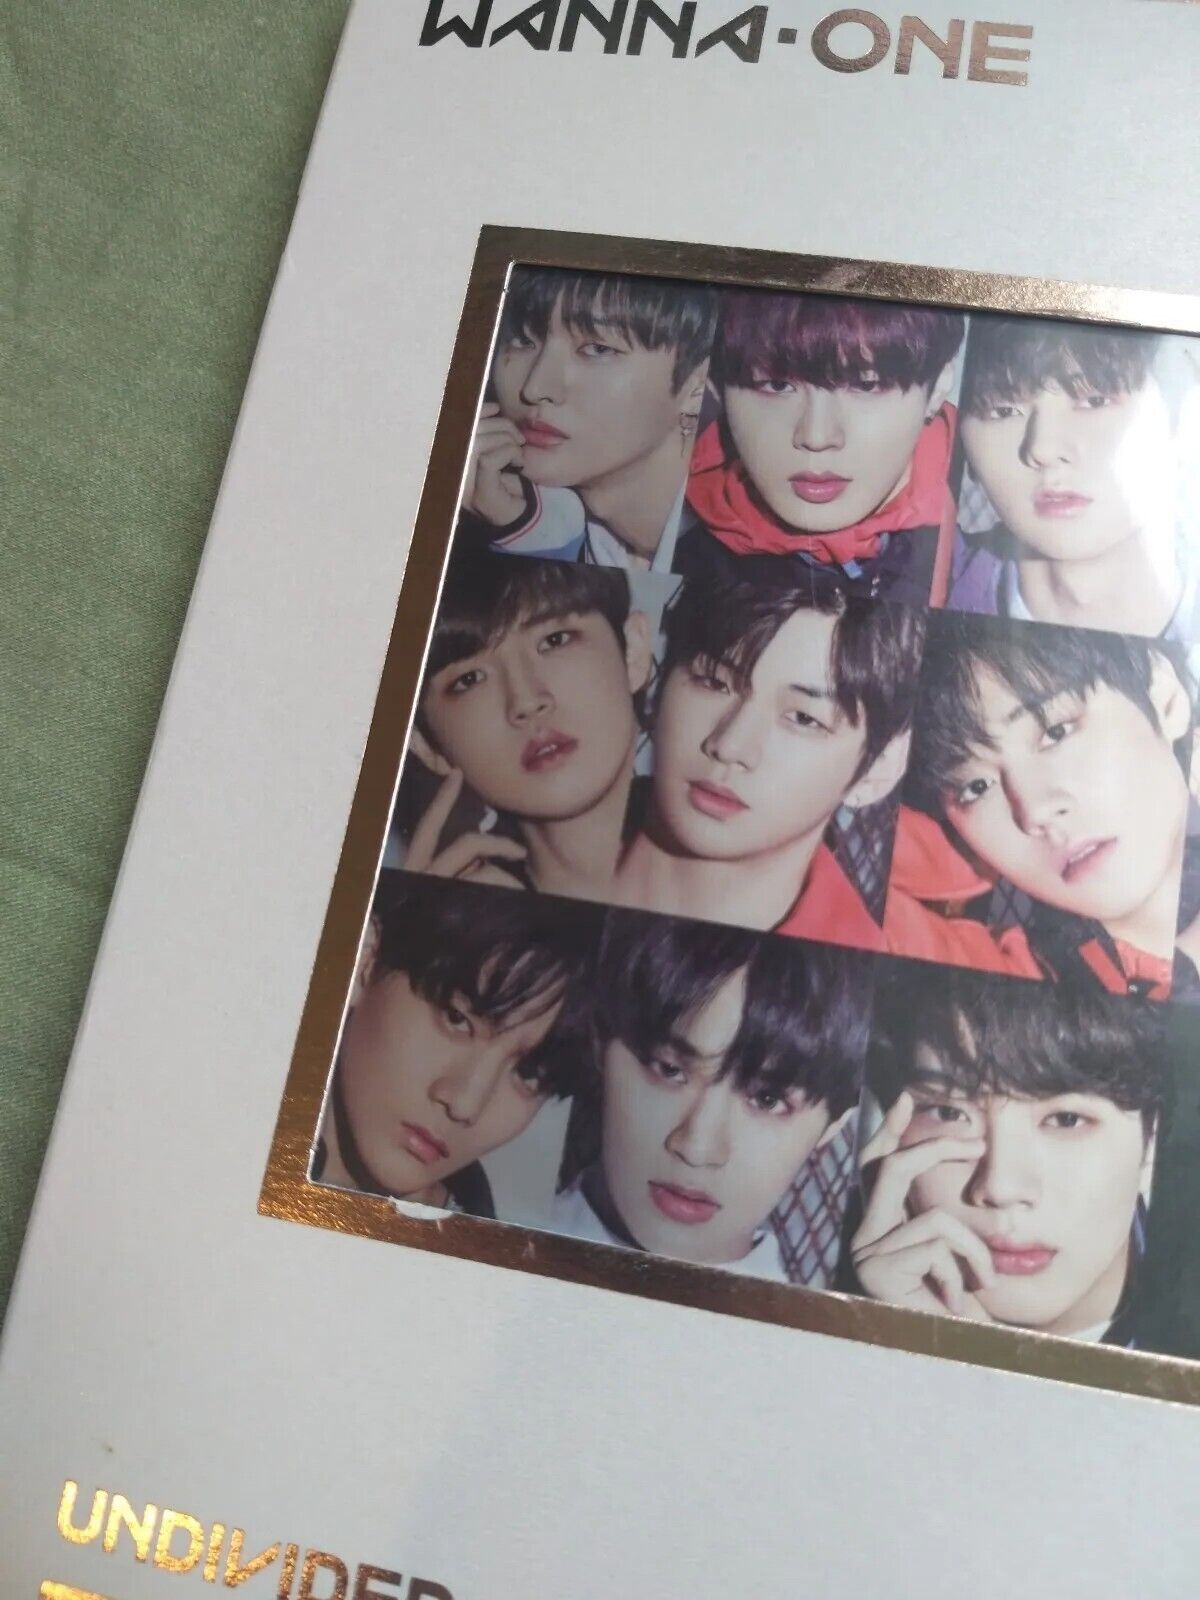 Wanna One Undivided Group Version with inclusions Woojin Jihoon Kpop Album CD